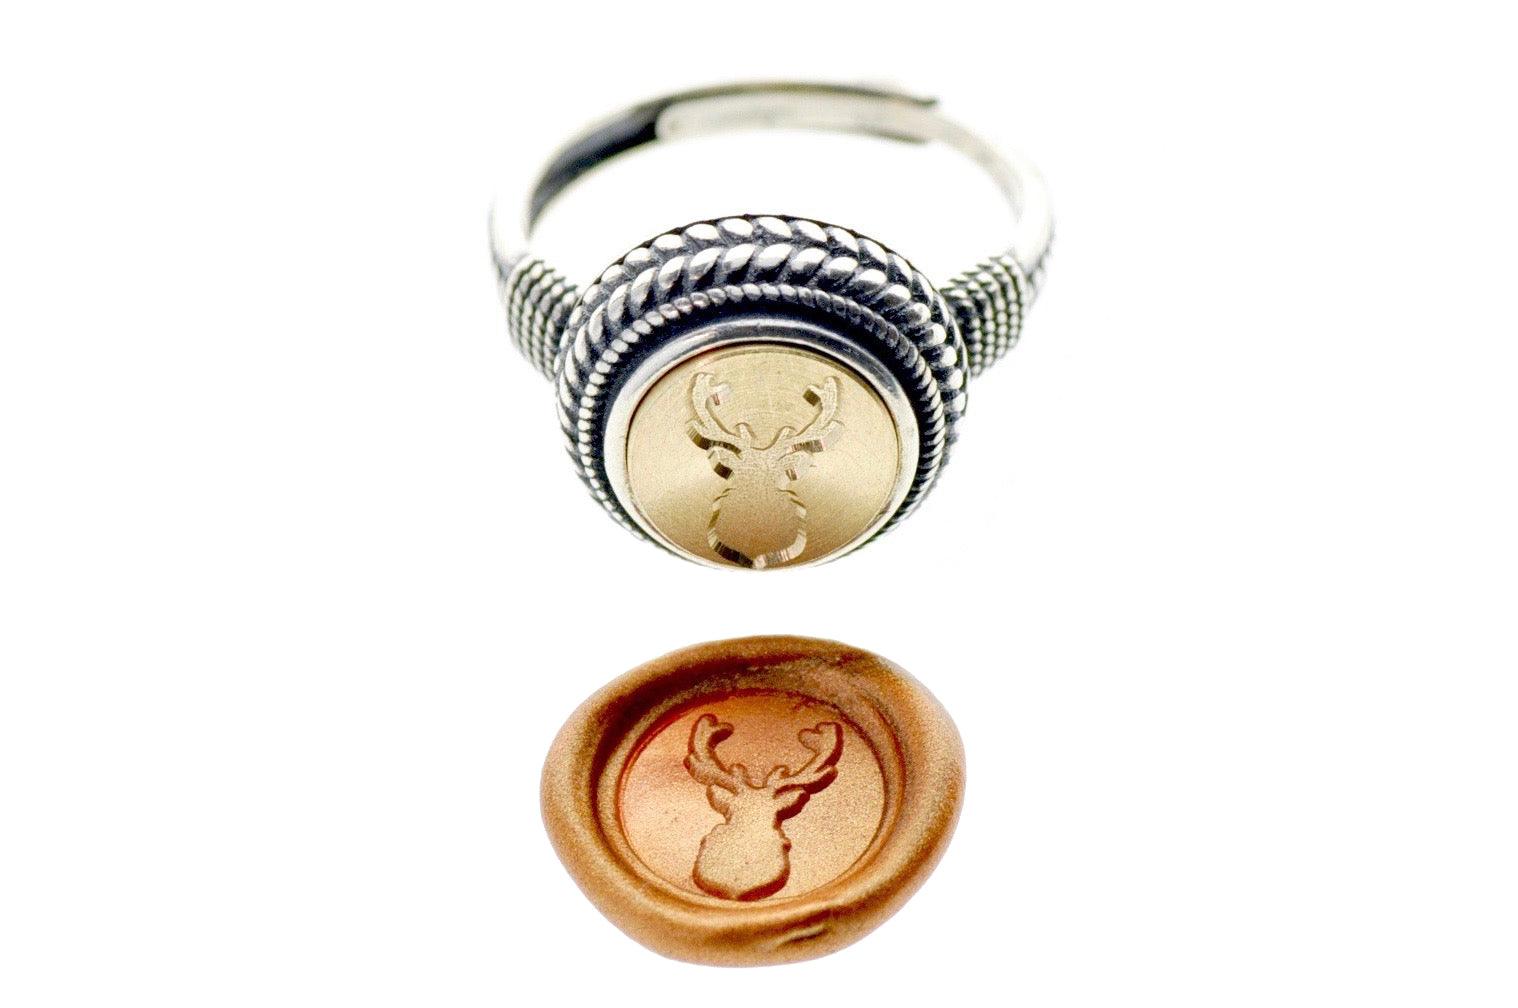 Antler Signet Ring - Backtozero B20 - 10mm, 10mm ring, 10w, accessory, Antler, Copper Gold, Deer, deer stag, her, jewelry, Laurel Wreath, ring, seal, seal ring, signet ring, size 6, size 7, size 8, wax seal, wax seal ring, wax seal stamp, wreath